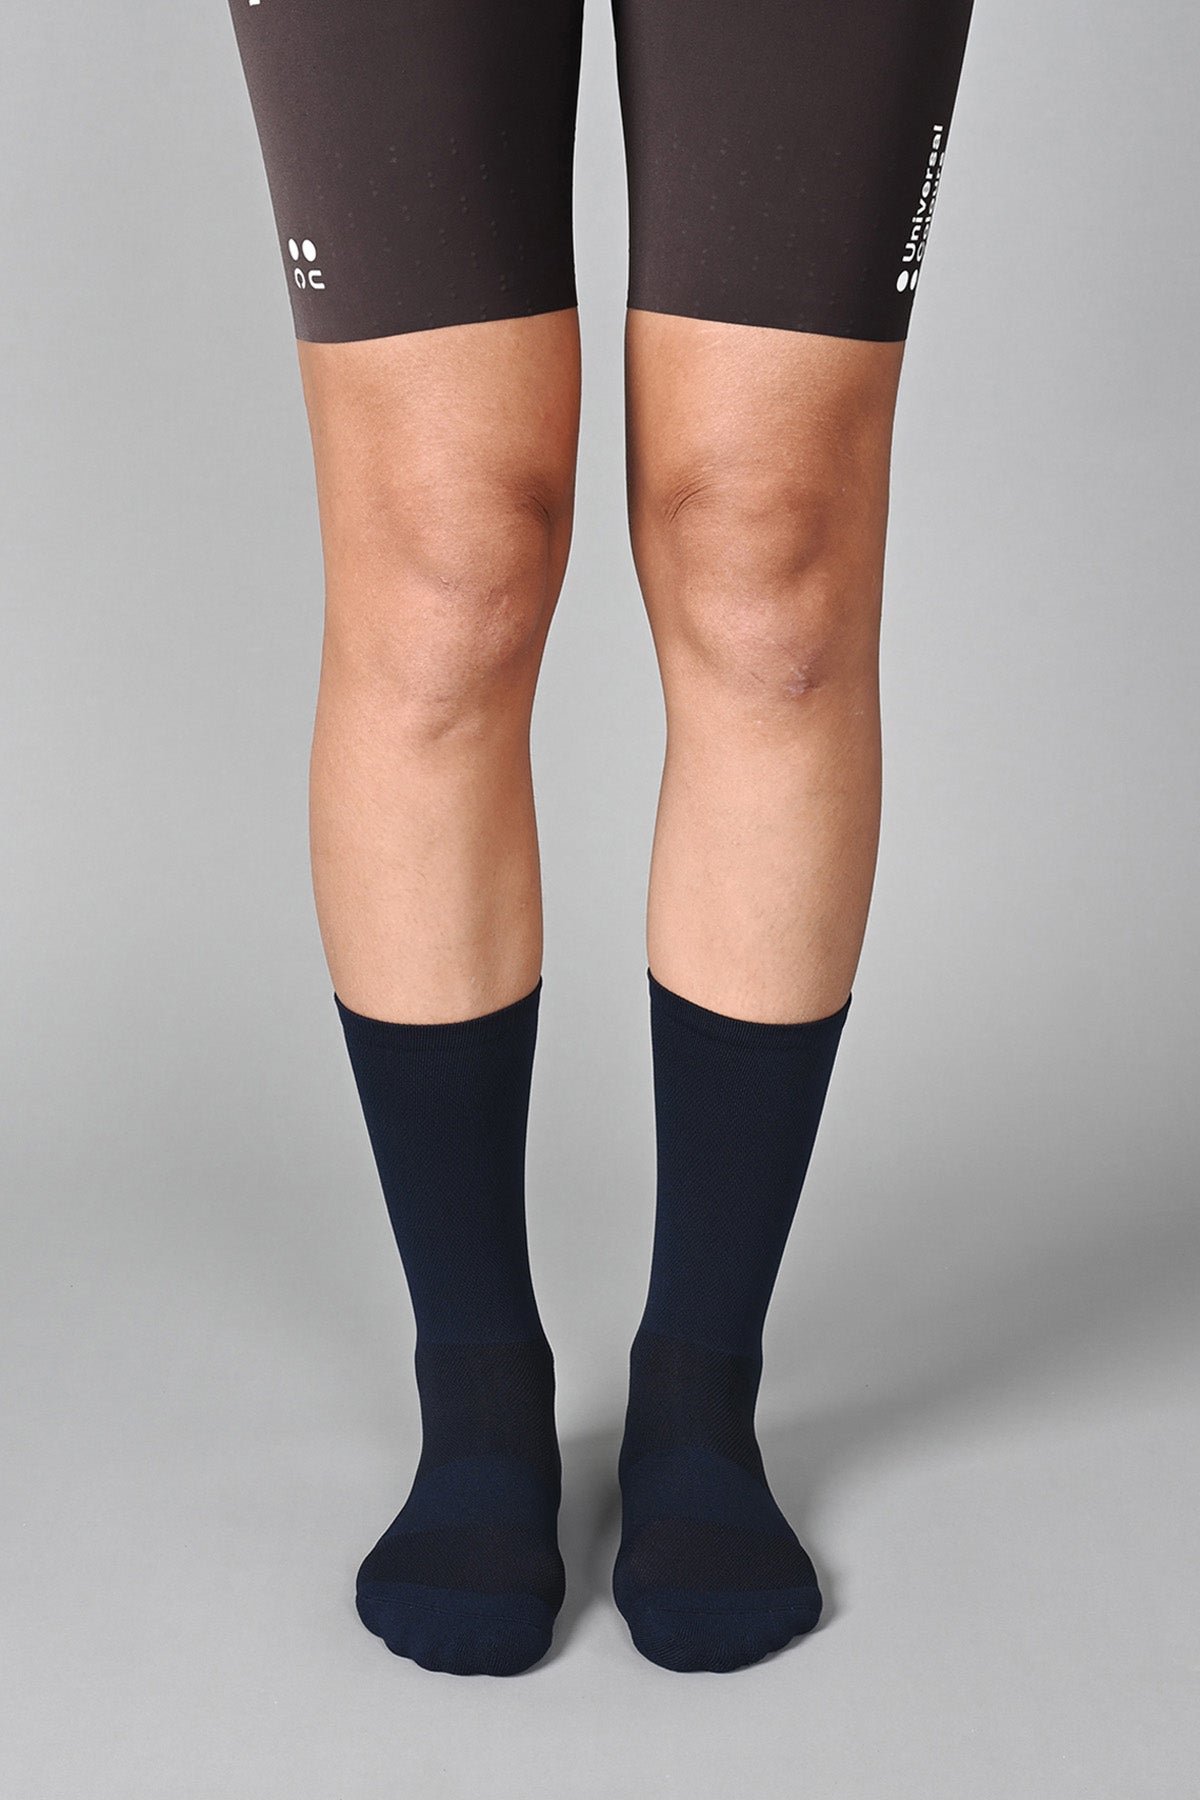 STEALTH - NAVY FRONT | BEST CYCLING SOCKS